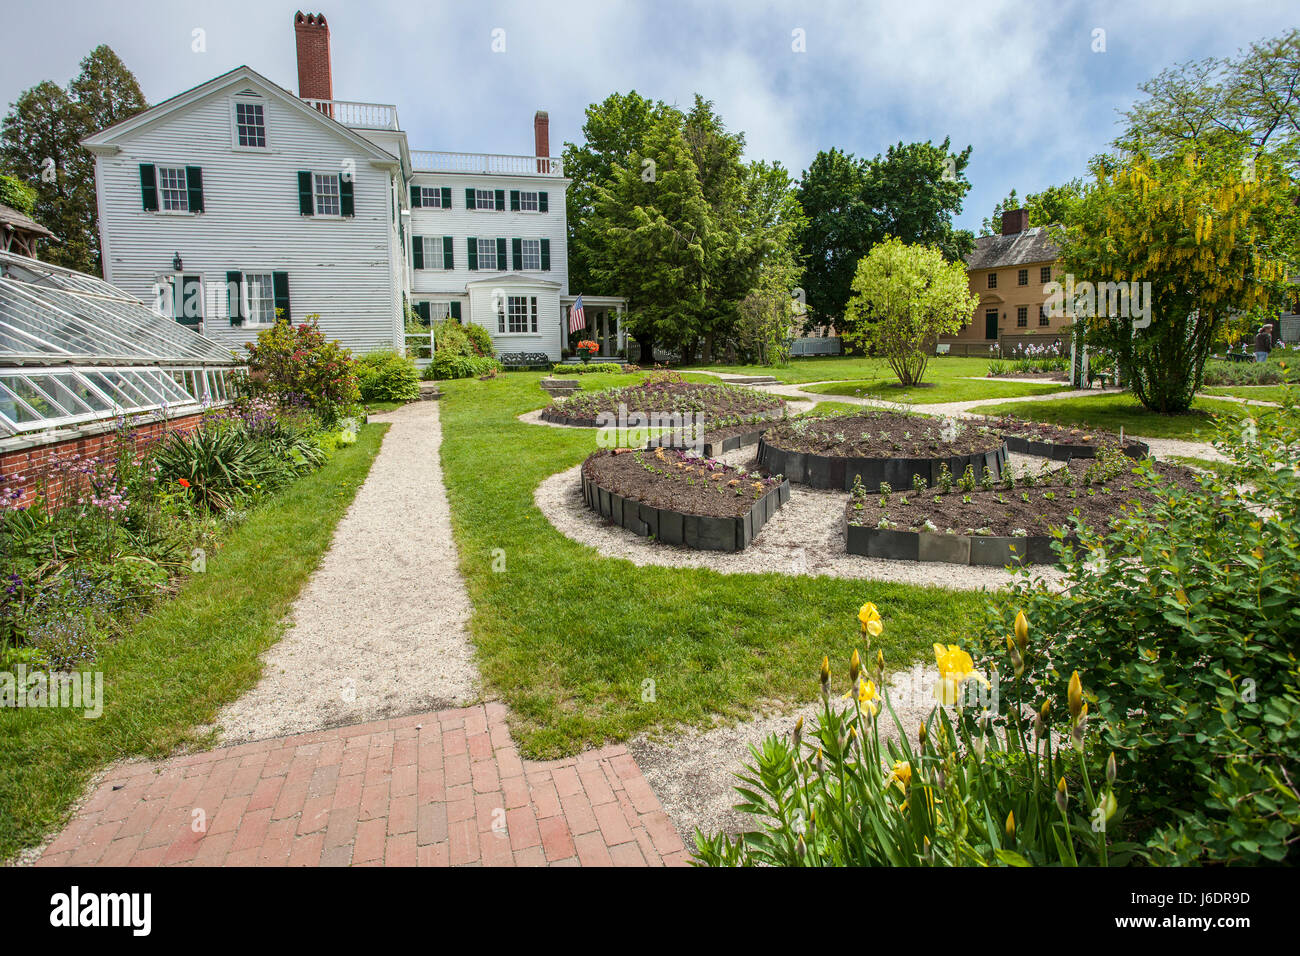 The Goodwin Mansion at Strawbery Banke in Portsmouth, New Hampshire Stock Photo